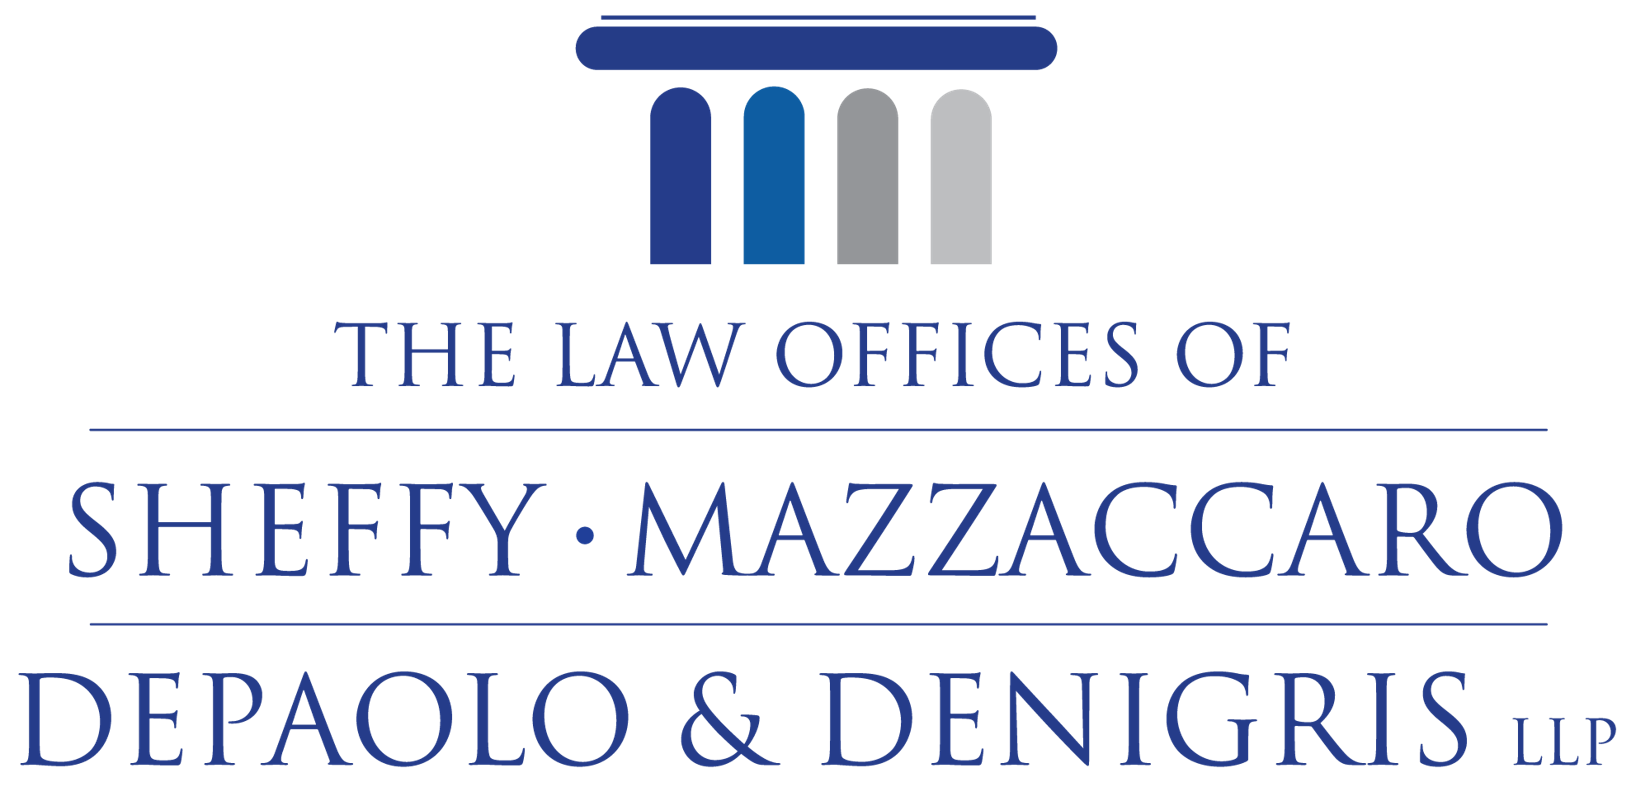 The Law Offices of Sheffy, Mazzaccaro, DePaolo & DeNigris, LLP